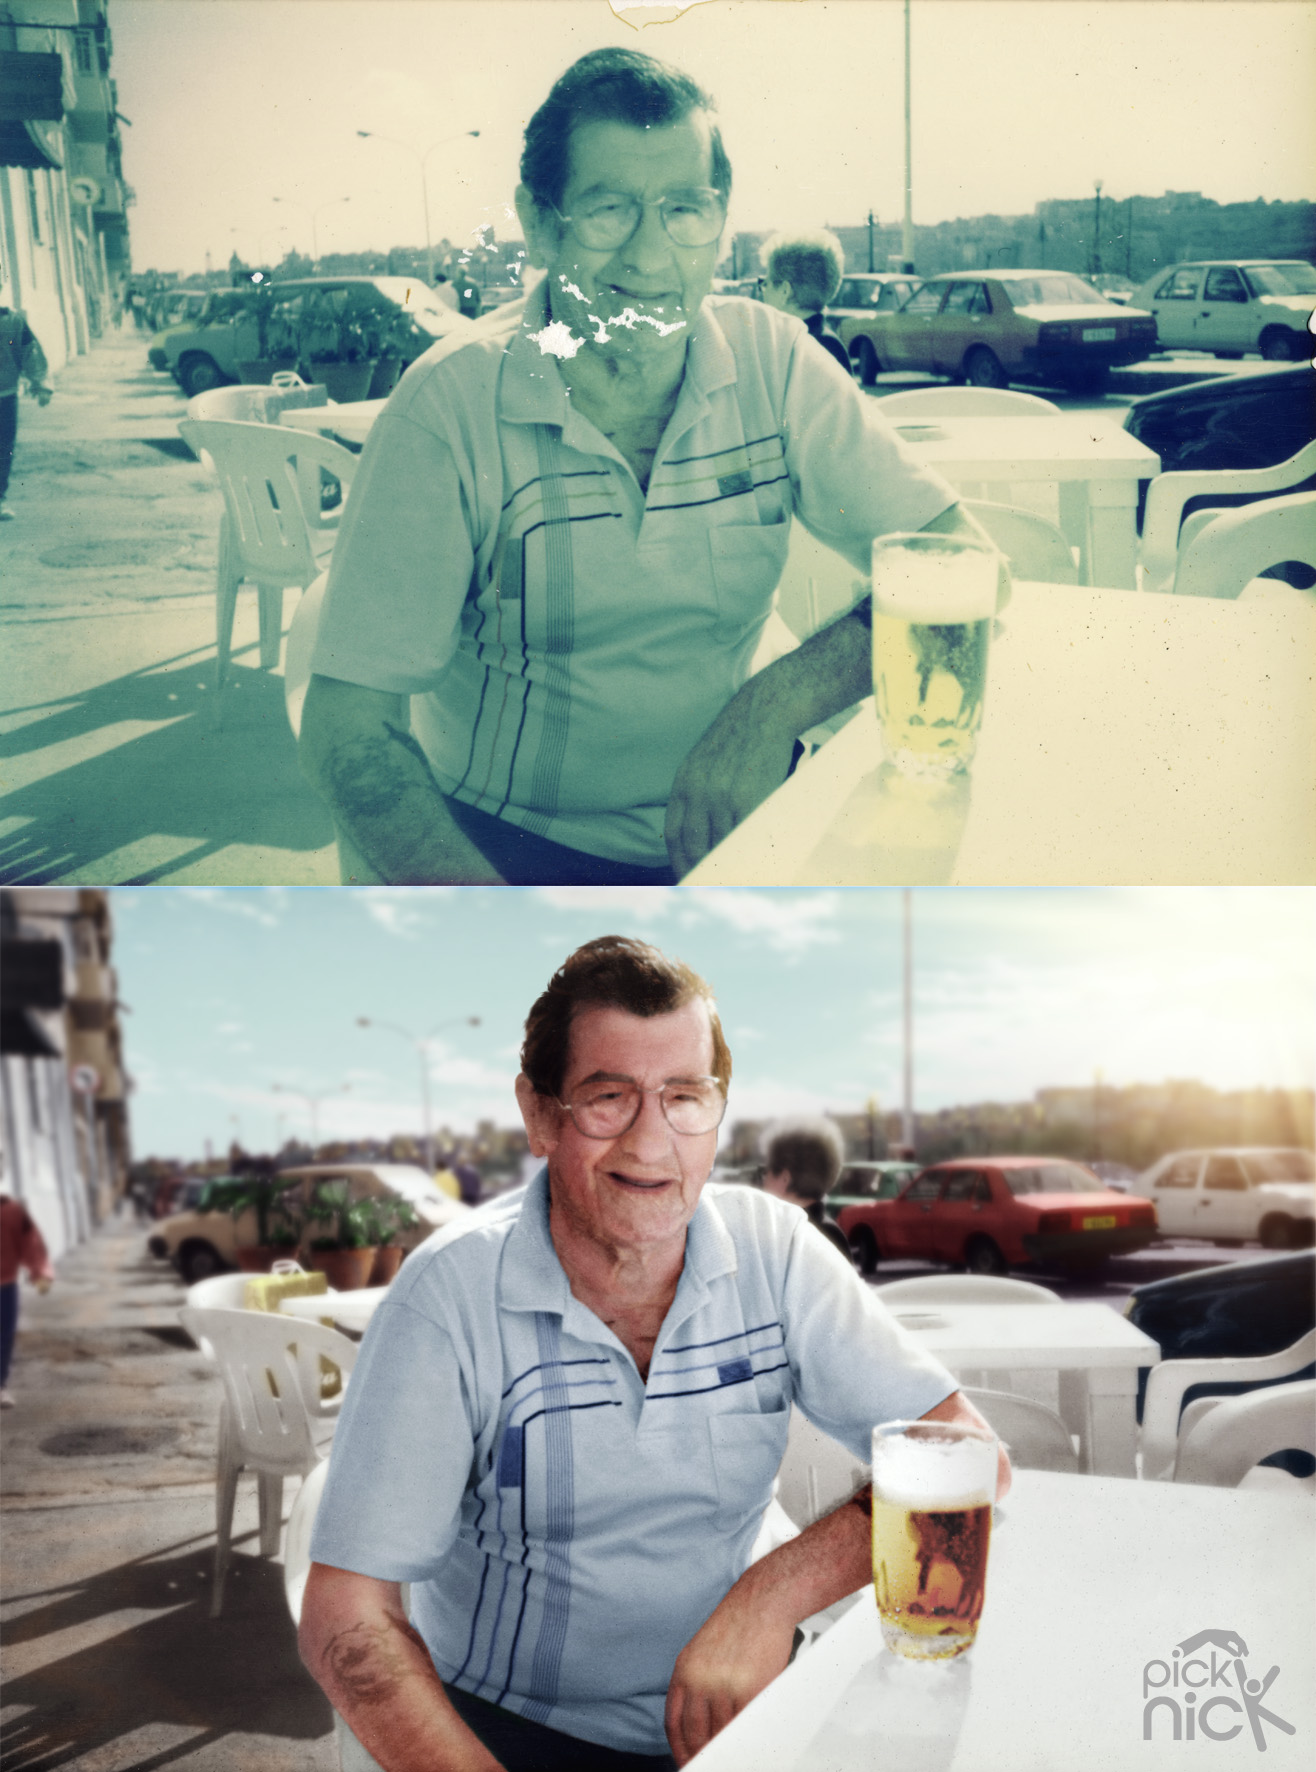 Sun faded photo of man drinking a beer